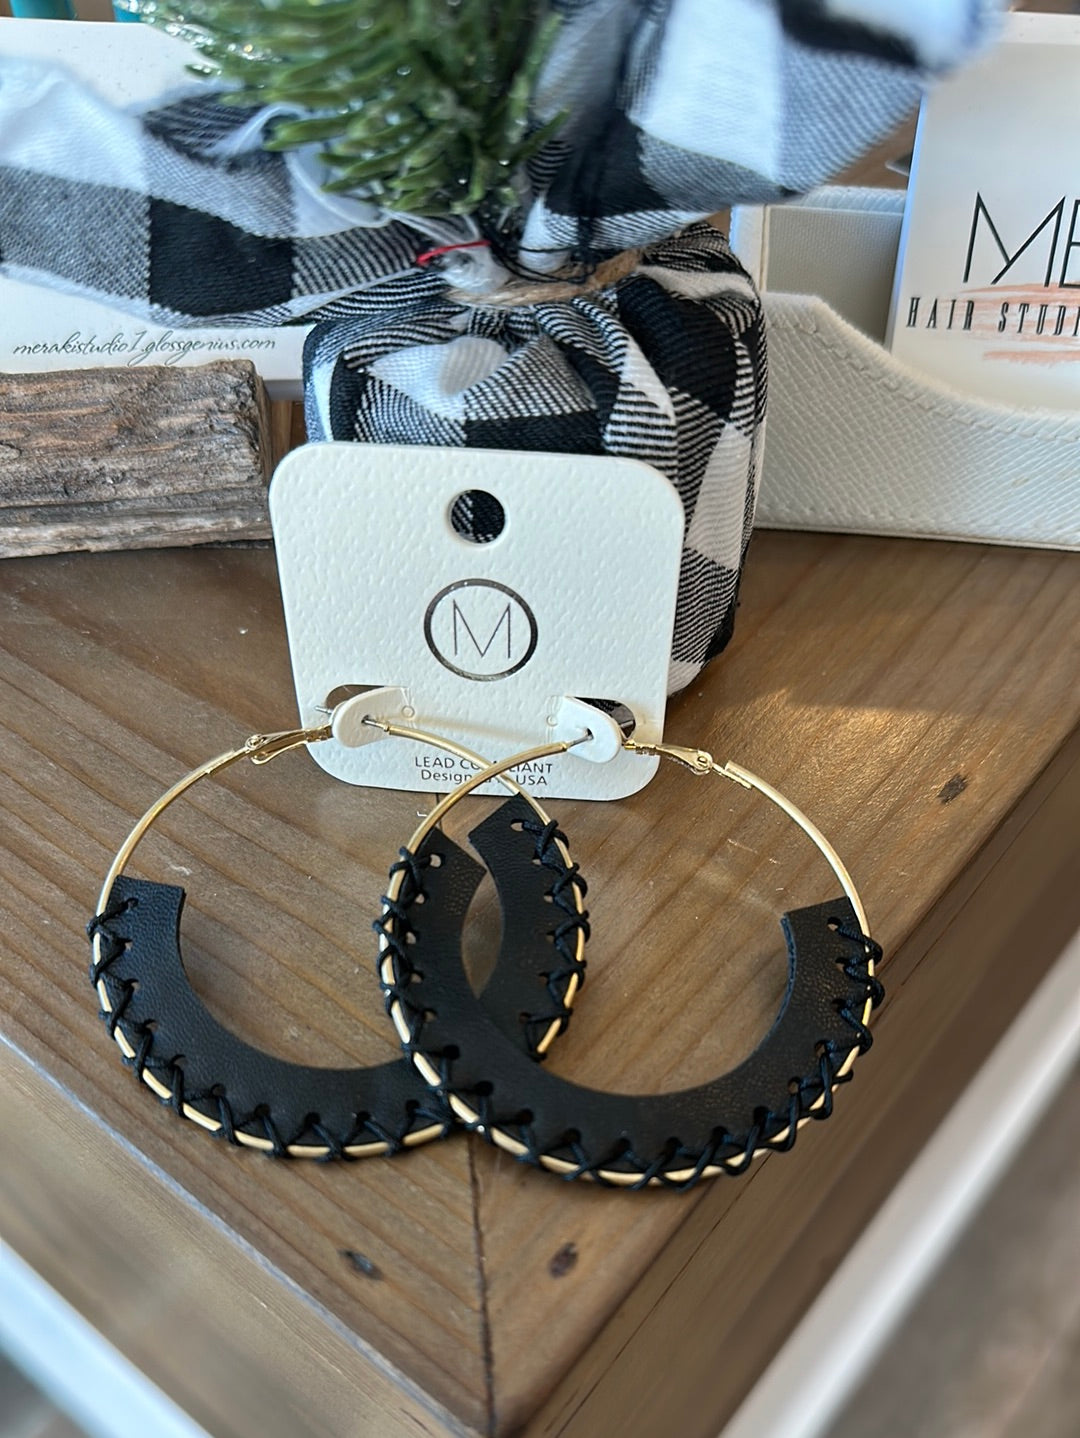 Leather Hoops